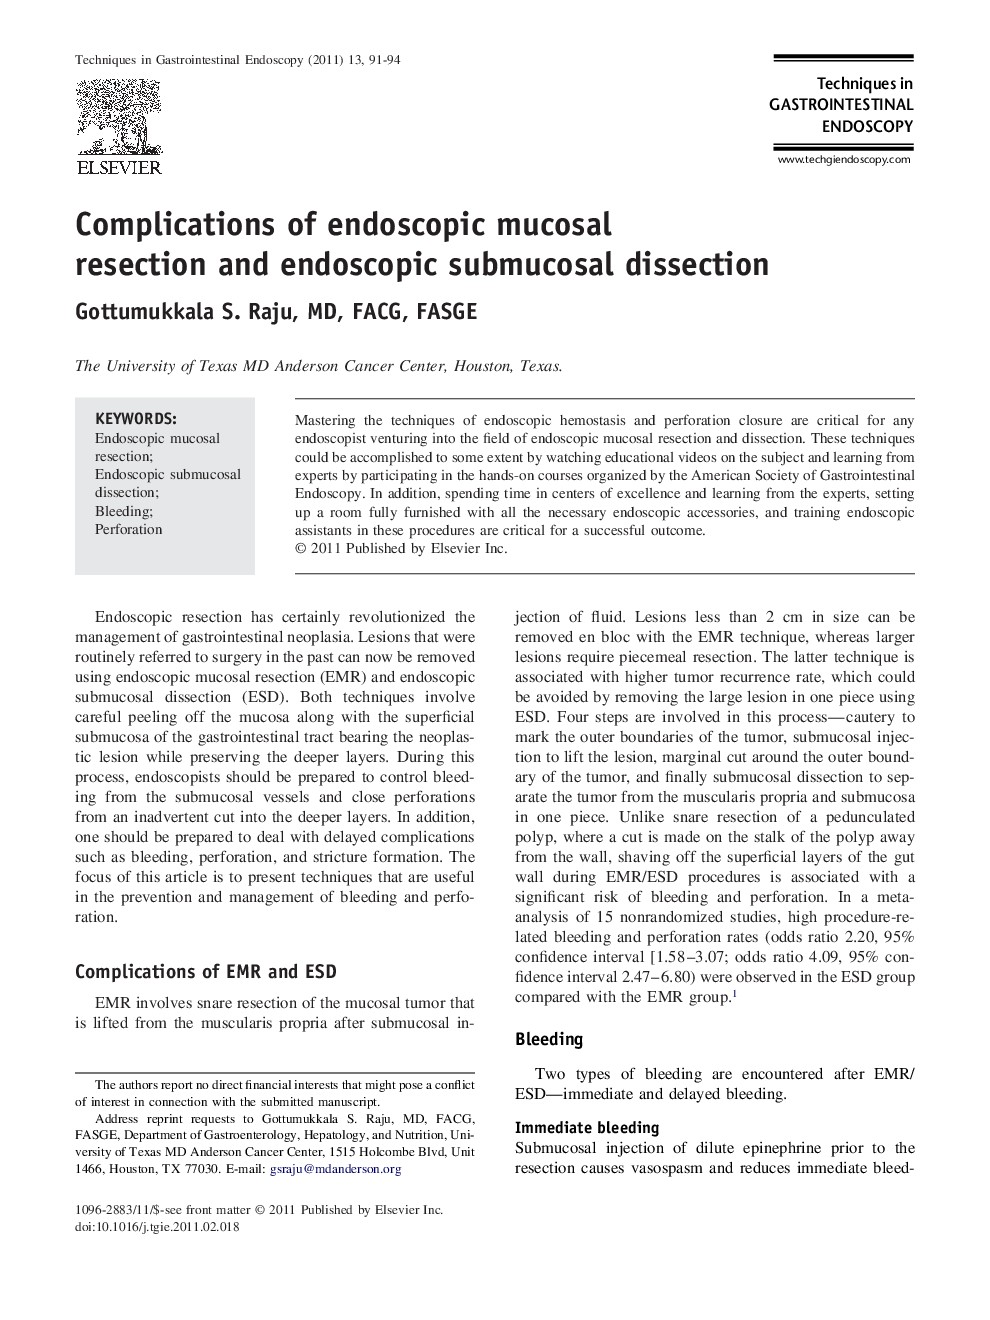 Complications of endoscopic mucosal resection and endoscopic submucosal dissection 